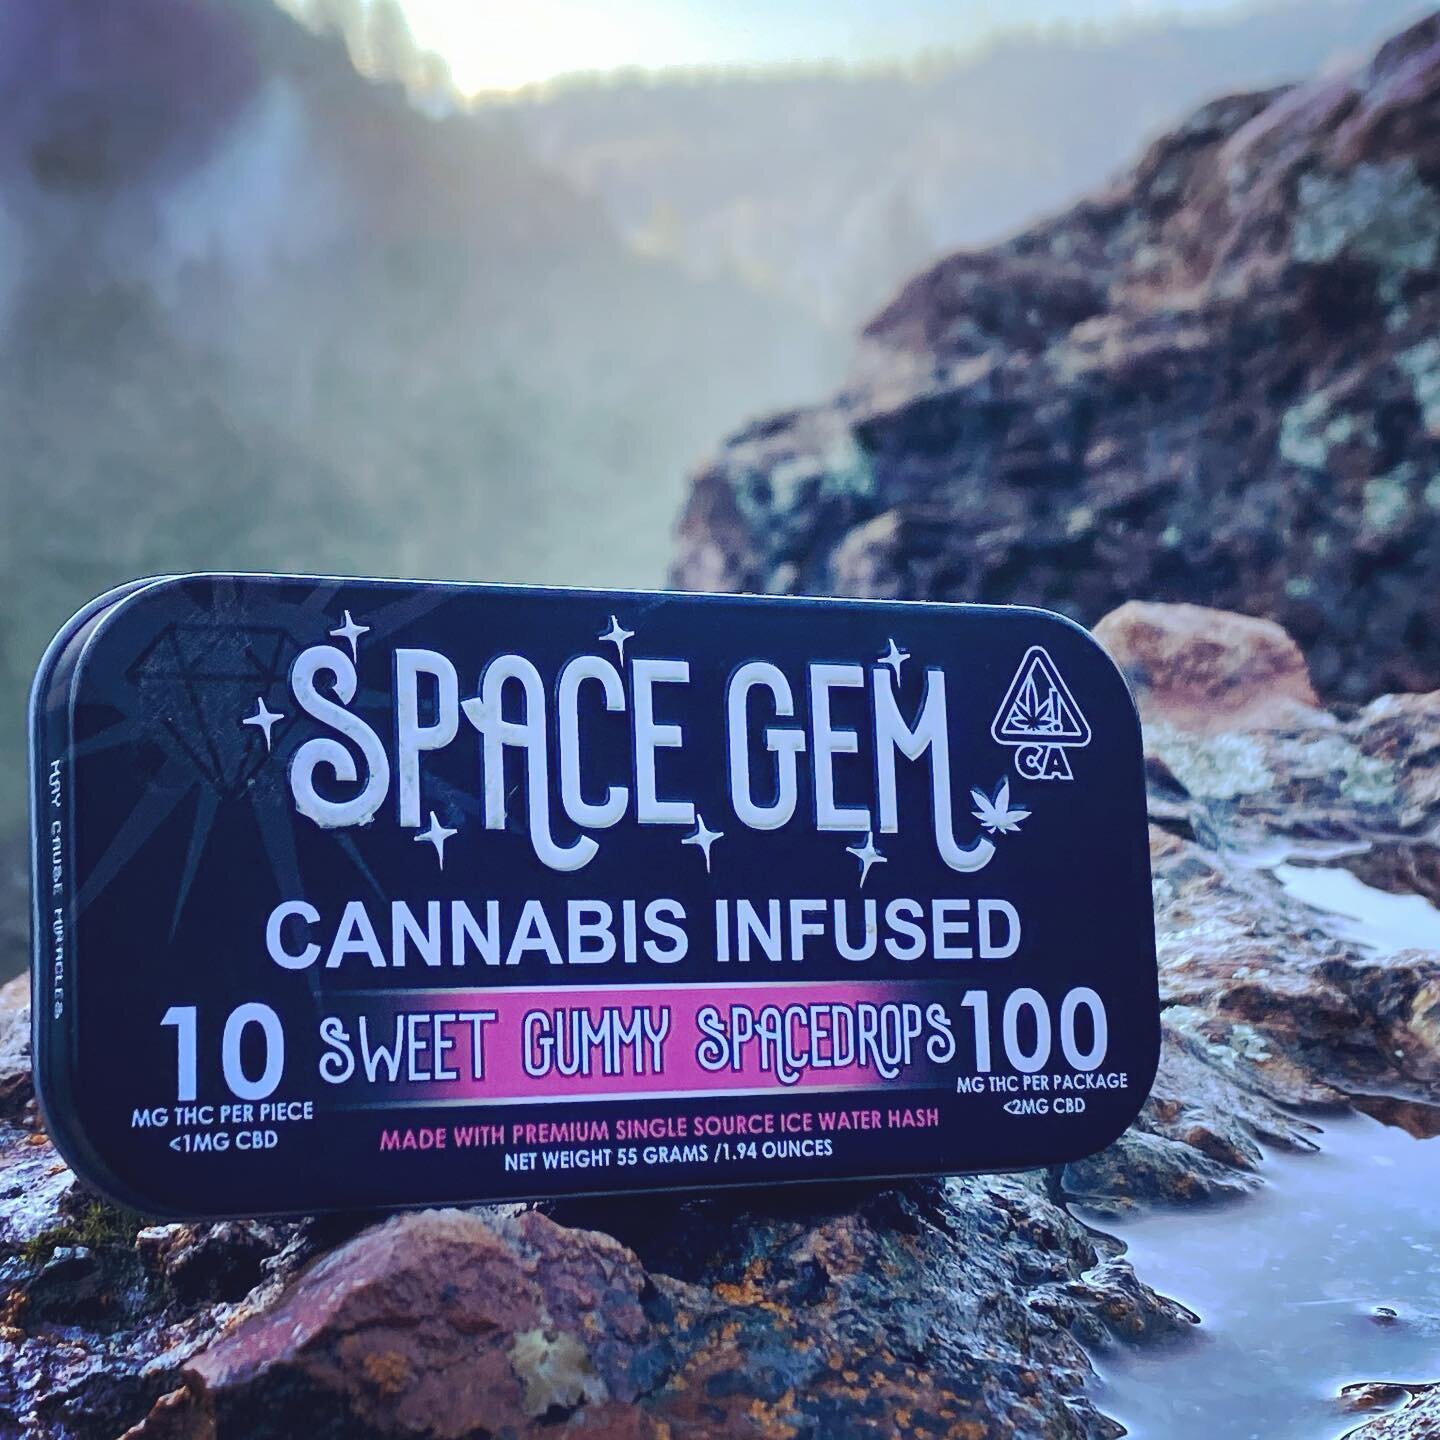 &ldquo;Don&rsquo;t be a hard rock when really you are a Gem&rdquo; 
@space_gem_ca 
#cannabis #infused #fullspectrum #icewater #hash #vegan #edible #woman #owned #humboldt #california #legal #cannabisculture #cannabiscommunity #love #kenwood #ca #high